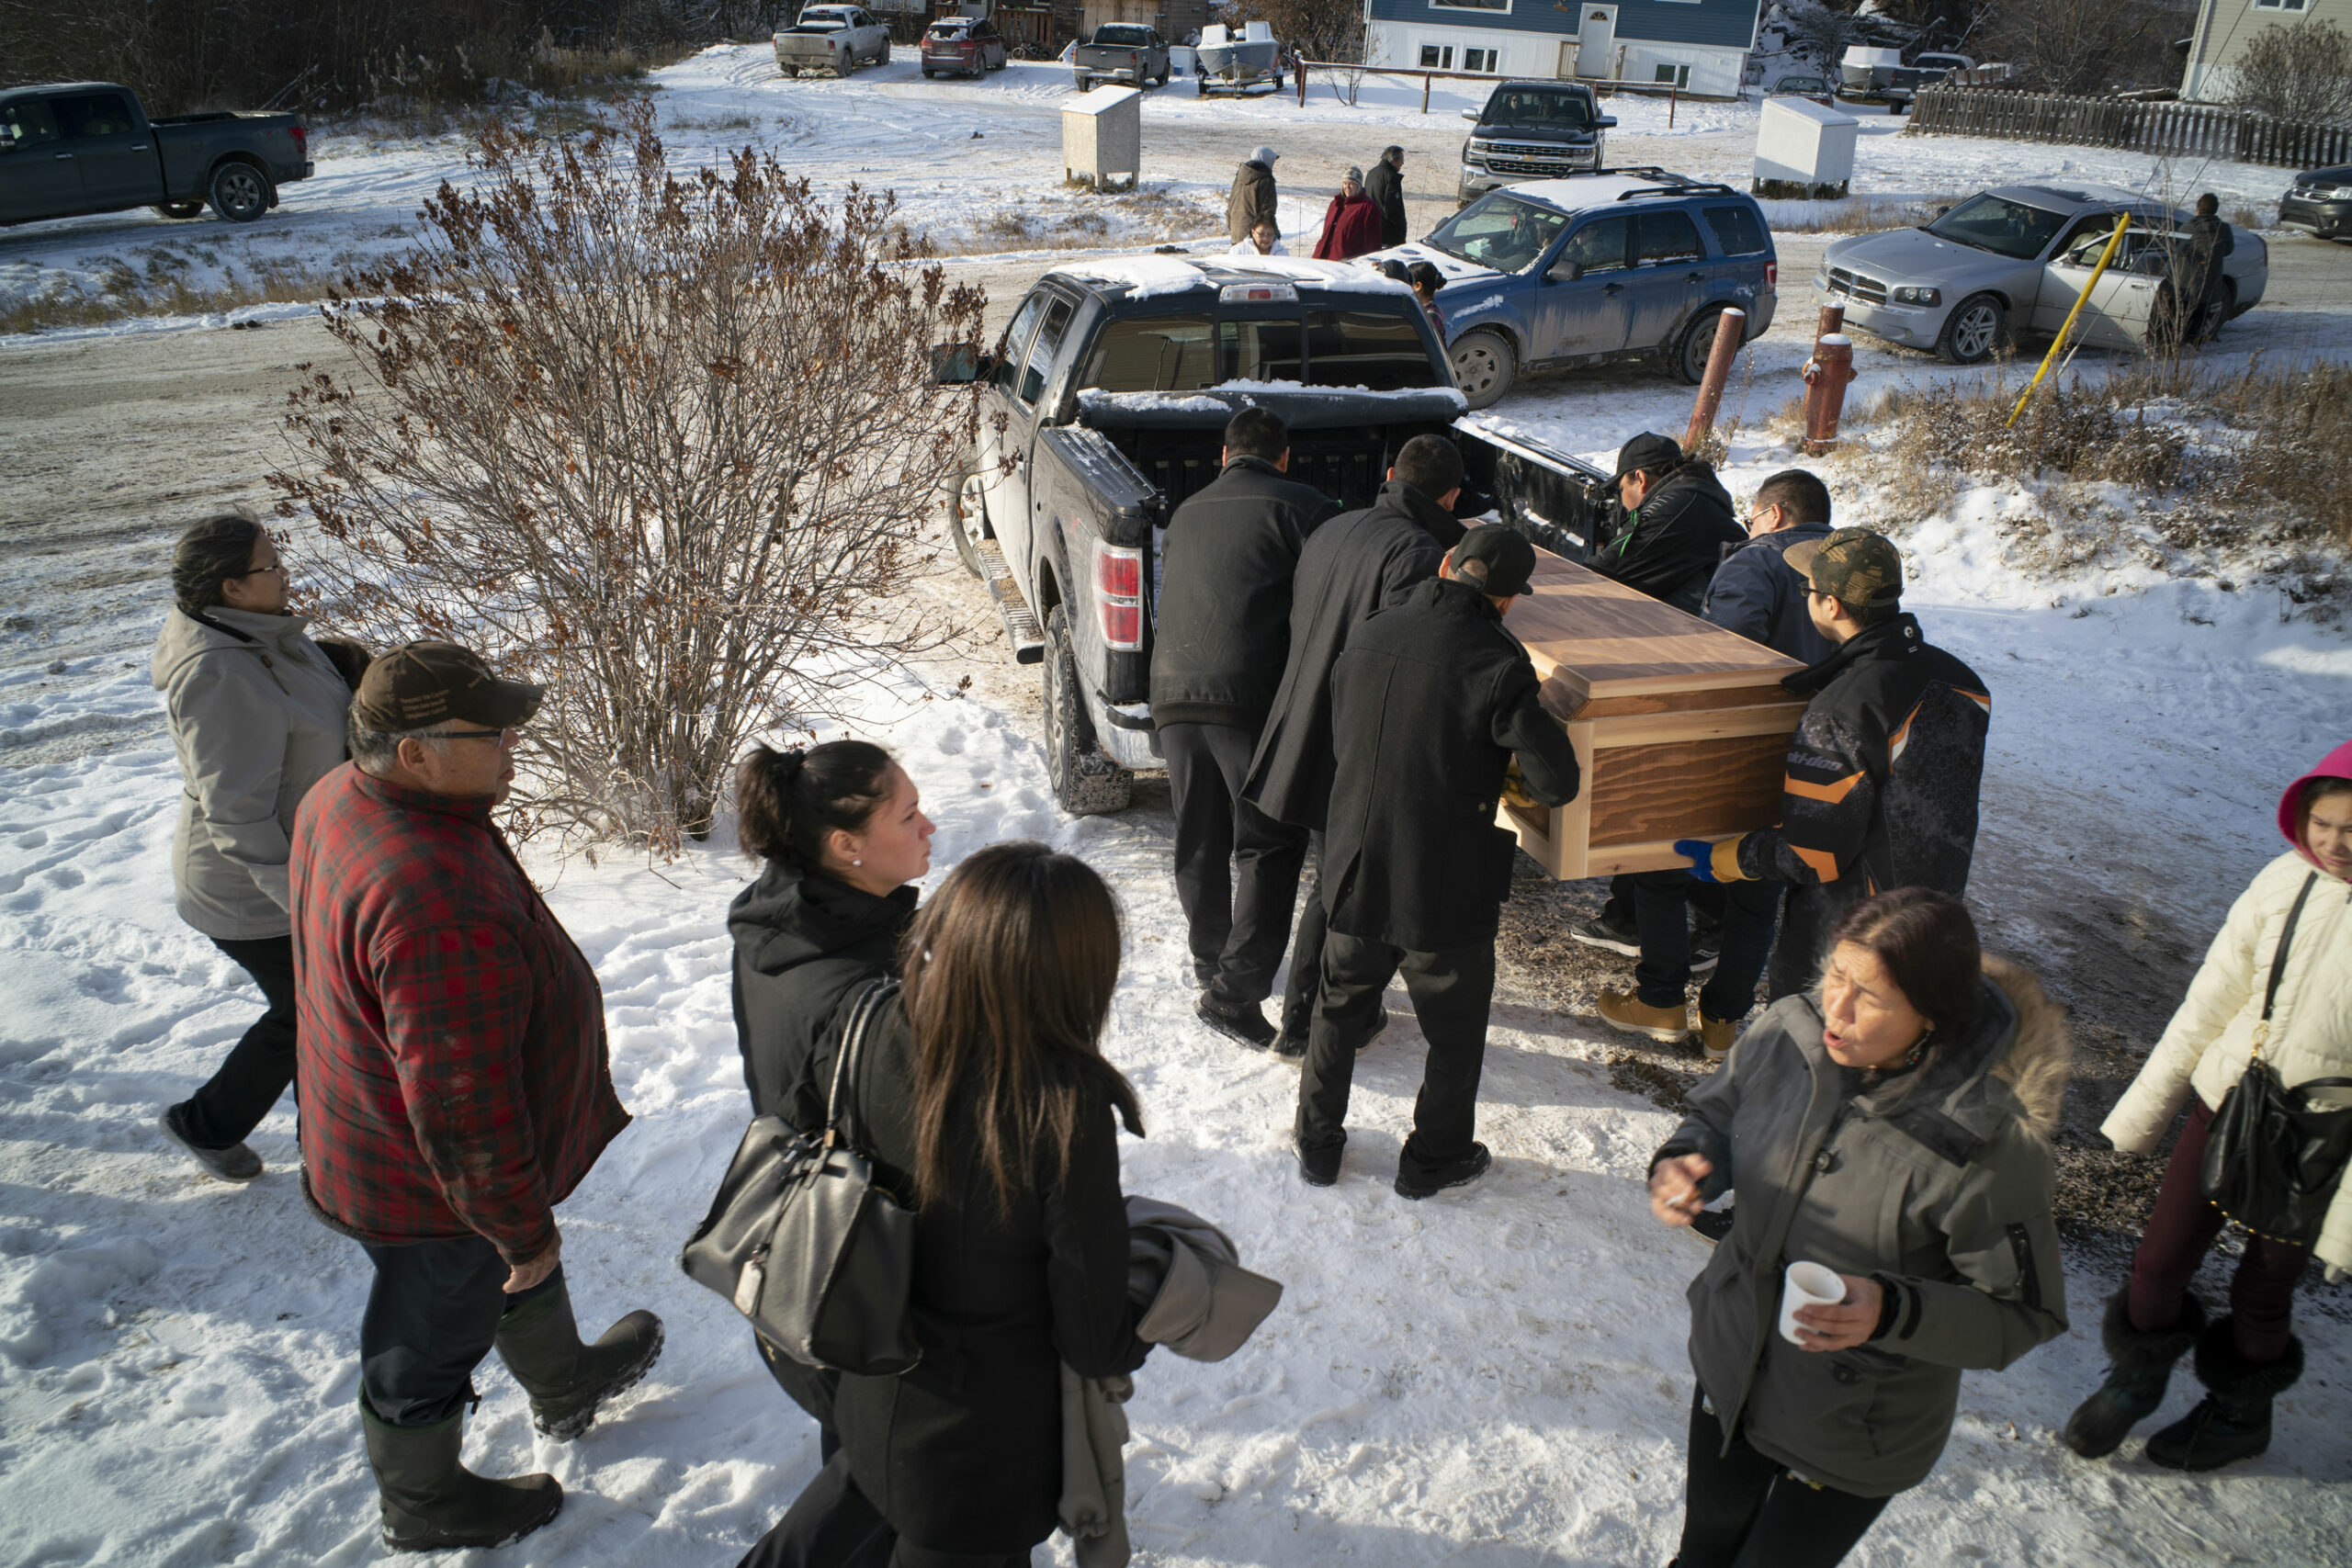 A casket being loaded onto a truck with people gathering nearby on a wintry day